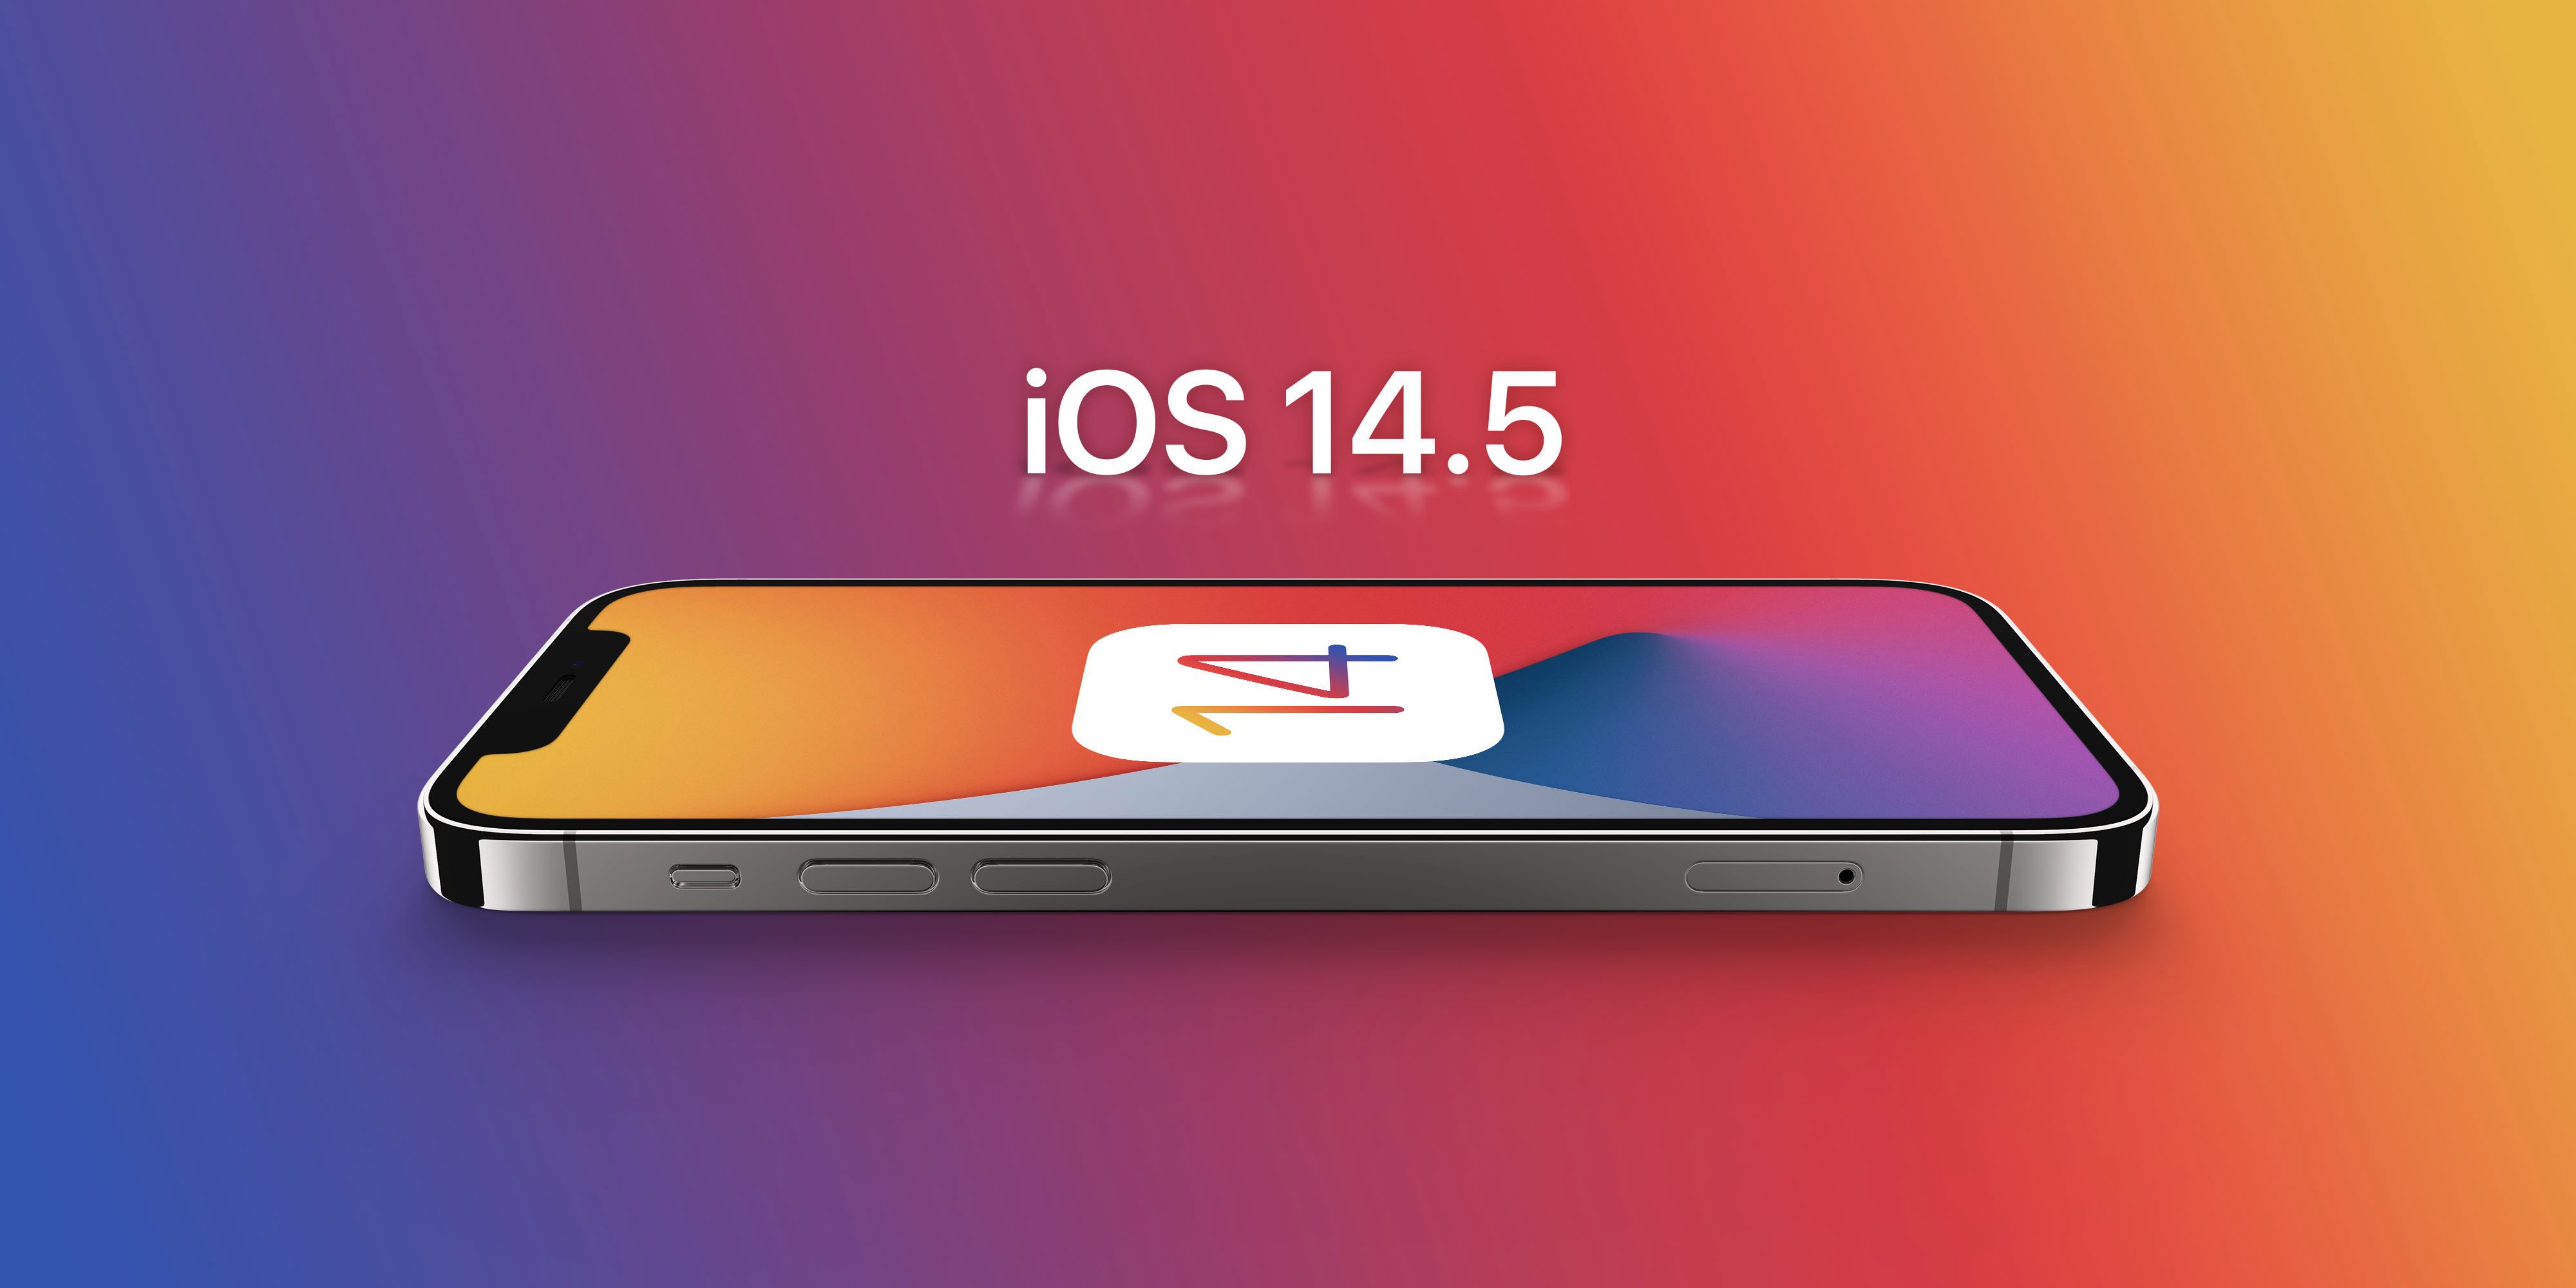 iOS 14.5 Update: Everything We Know About The App Tracking Transparency